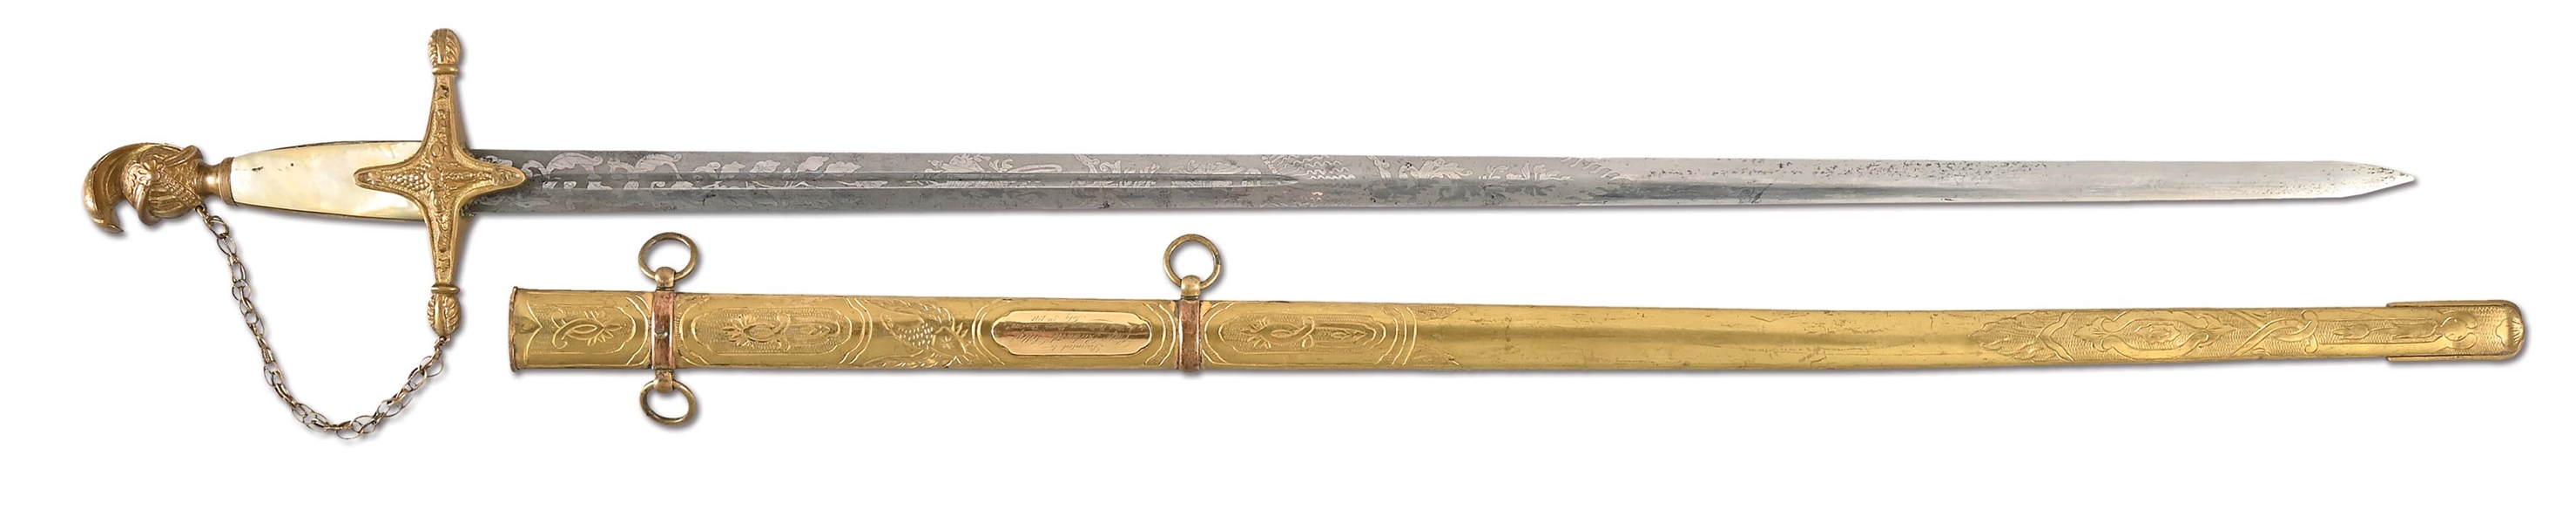 AMES KNIGHT HEAD MILITIA OFFICERS SWORD PRESENTED TO CAPTAIN RICHARD LILLY, BALTIMORE SHARP SHOOTERS.